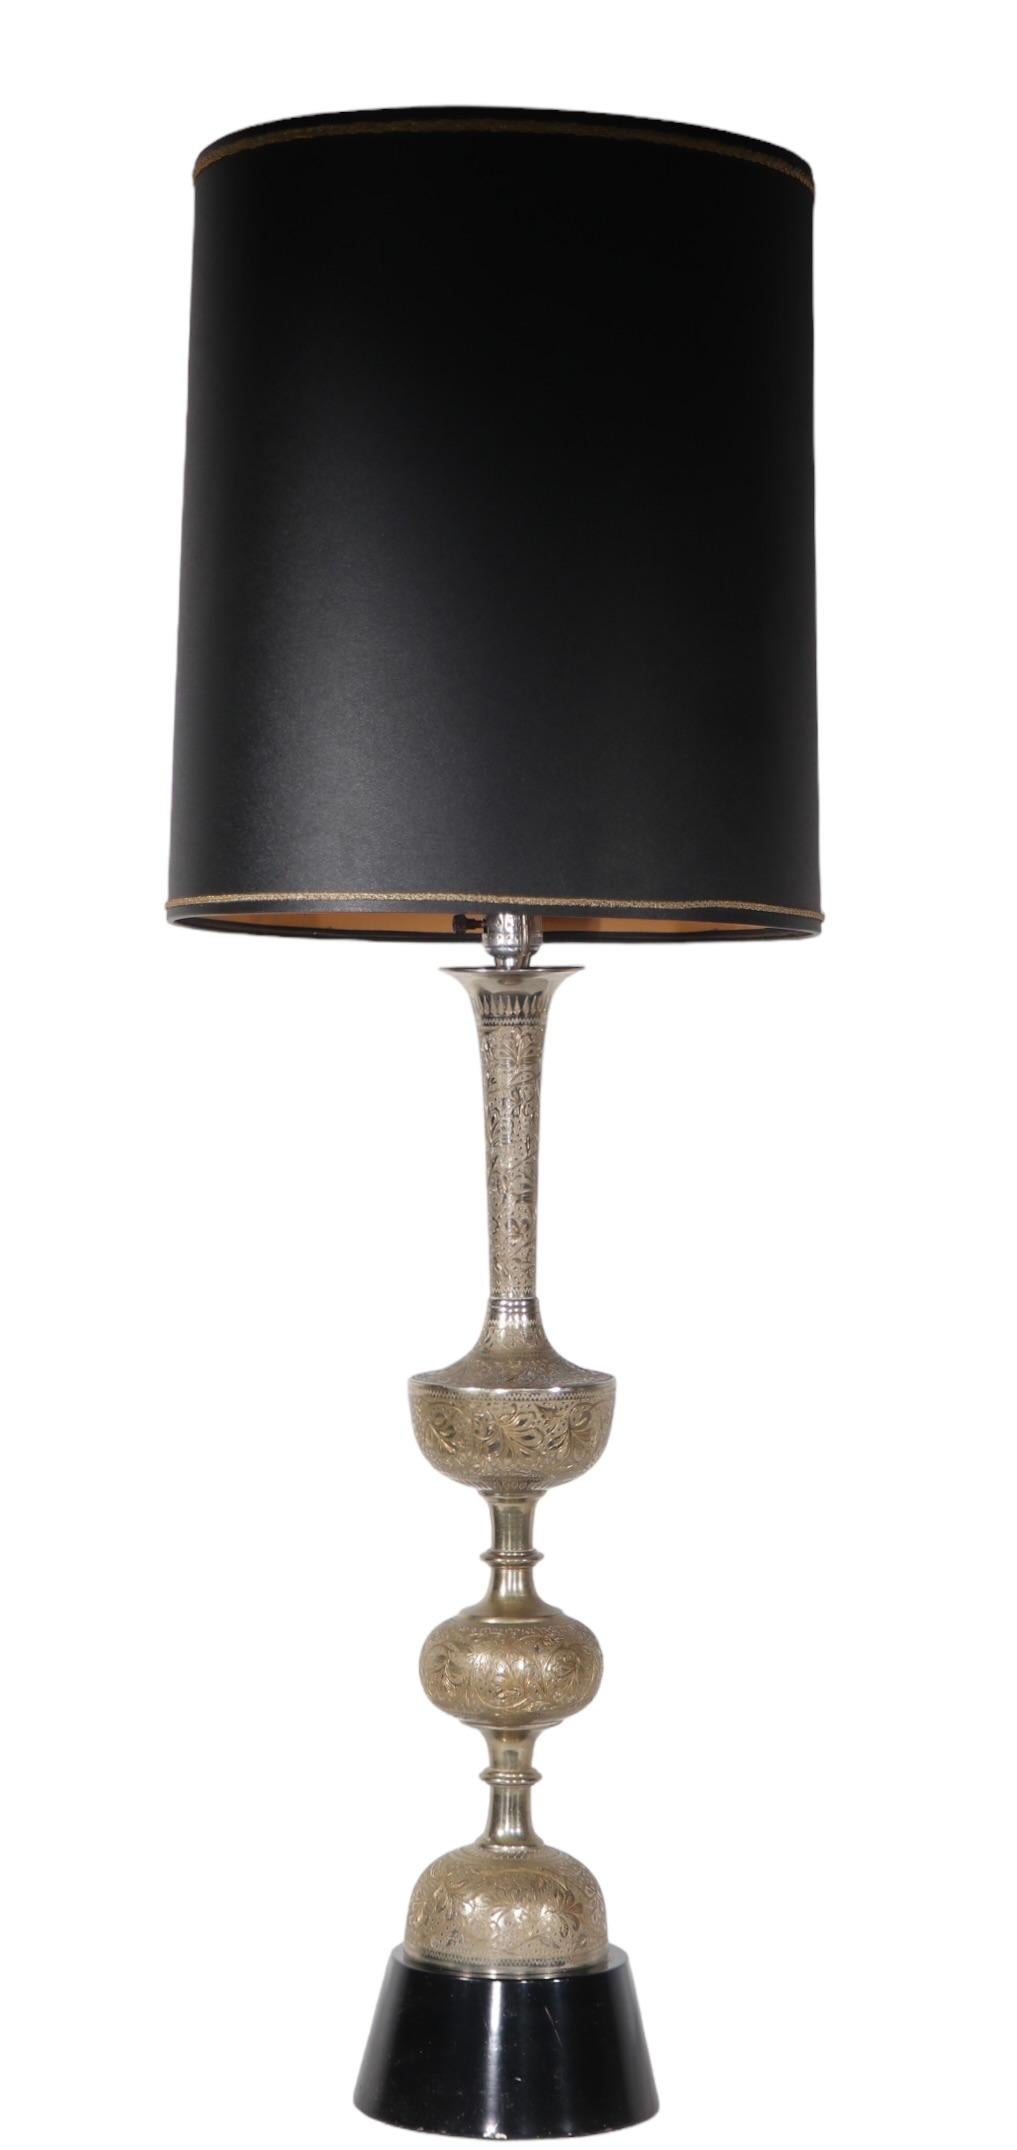  Large Vintage Table Lamp with Chased Silver Finish c. 1970's  For Sale 8